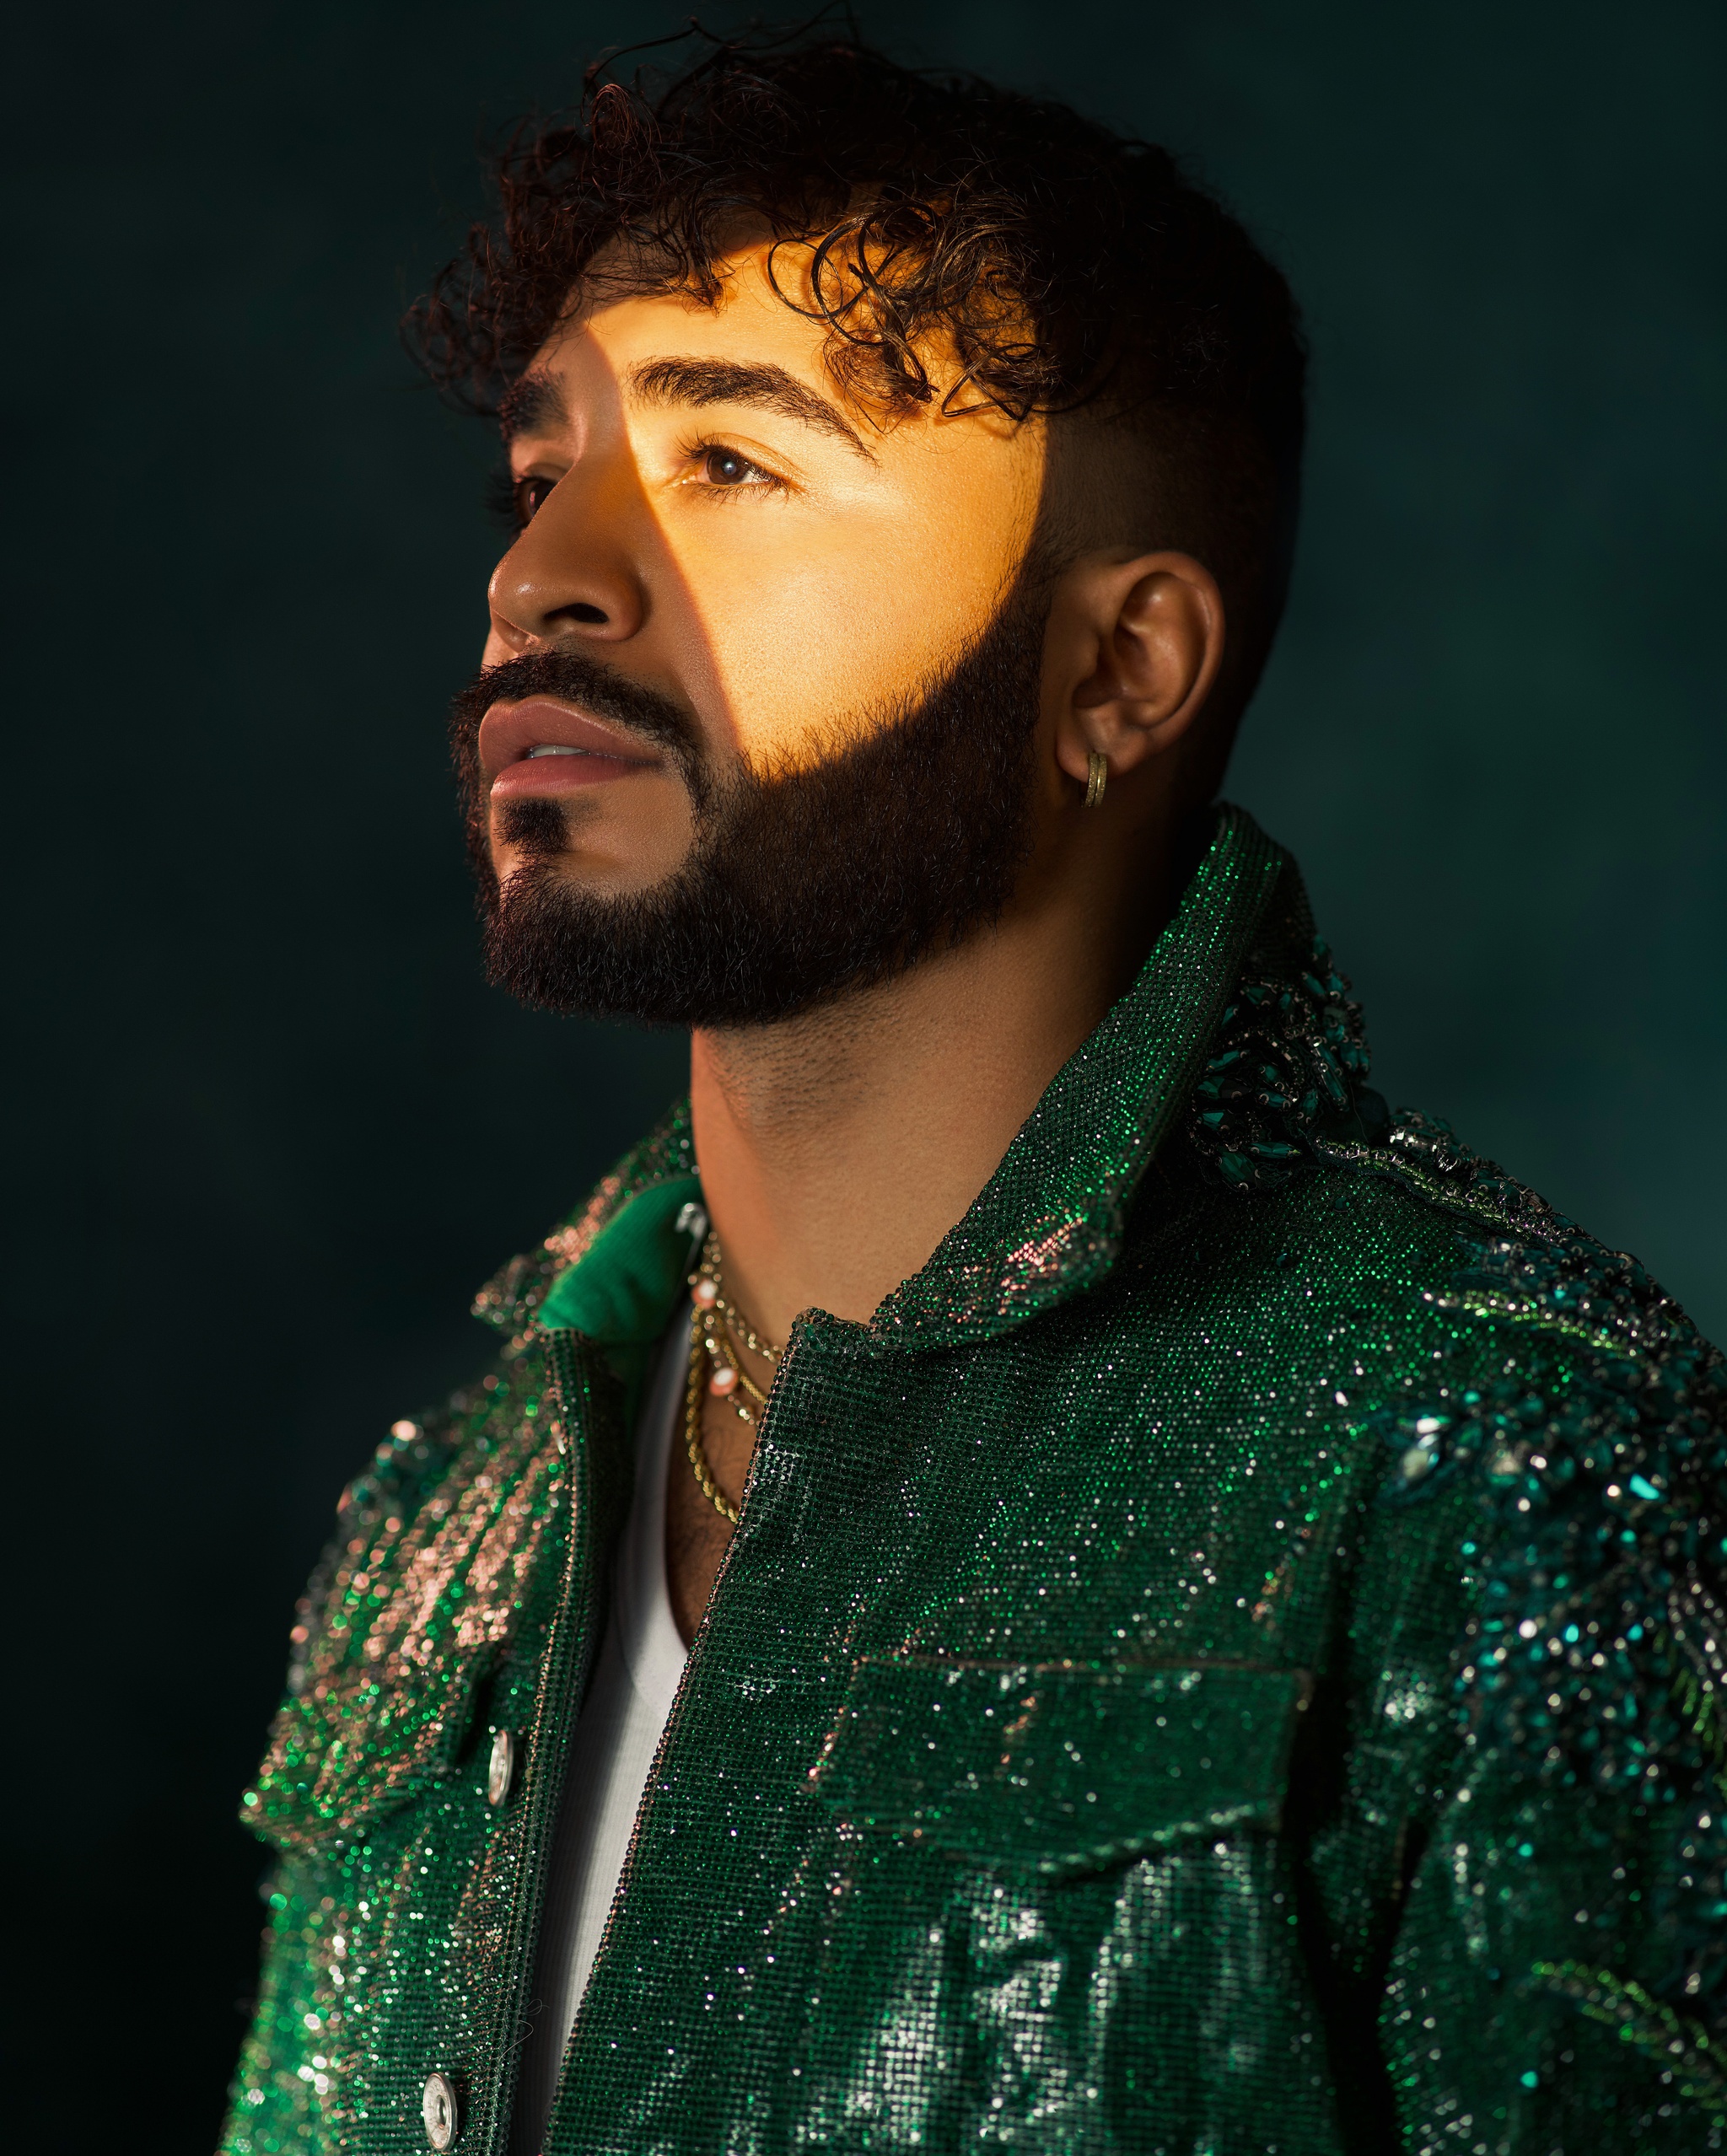 A Dominican man stands in profile looking off to the side. He wears a jewel green, beaded jacket. He has a dark beard and mustache and the left side of his face is lit with a bright, dramatic light. 